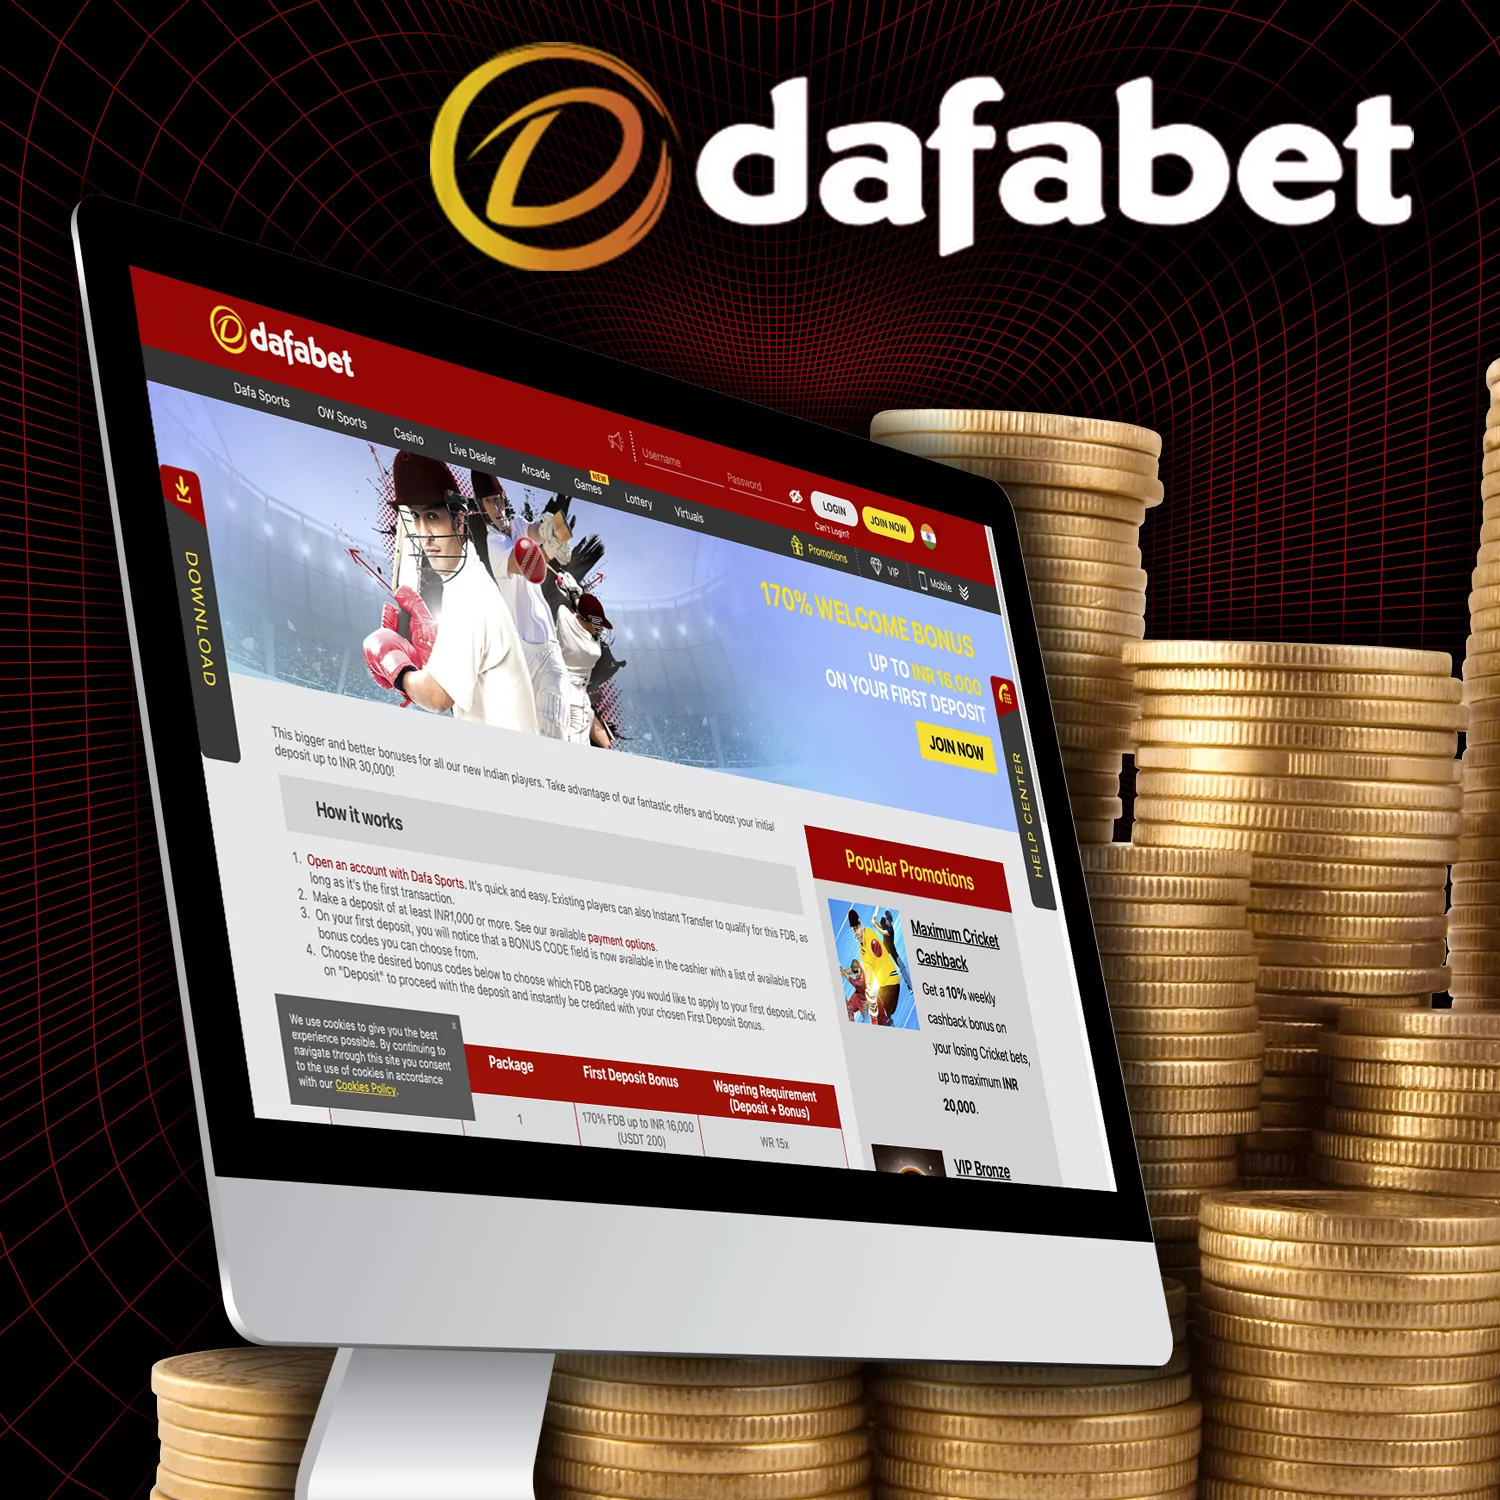 Every new Dafabet user receives a welcome bonus of up to INR 30,000.